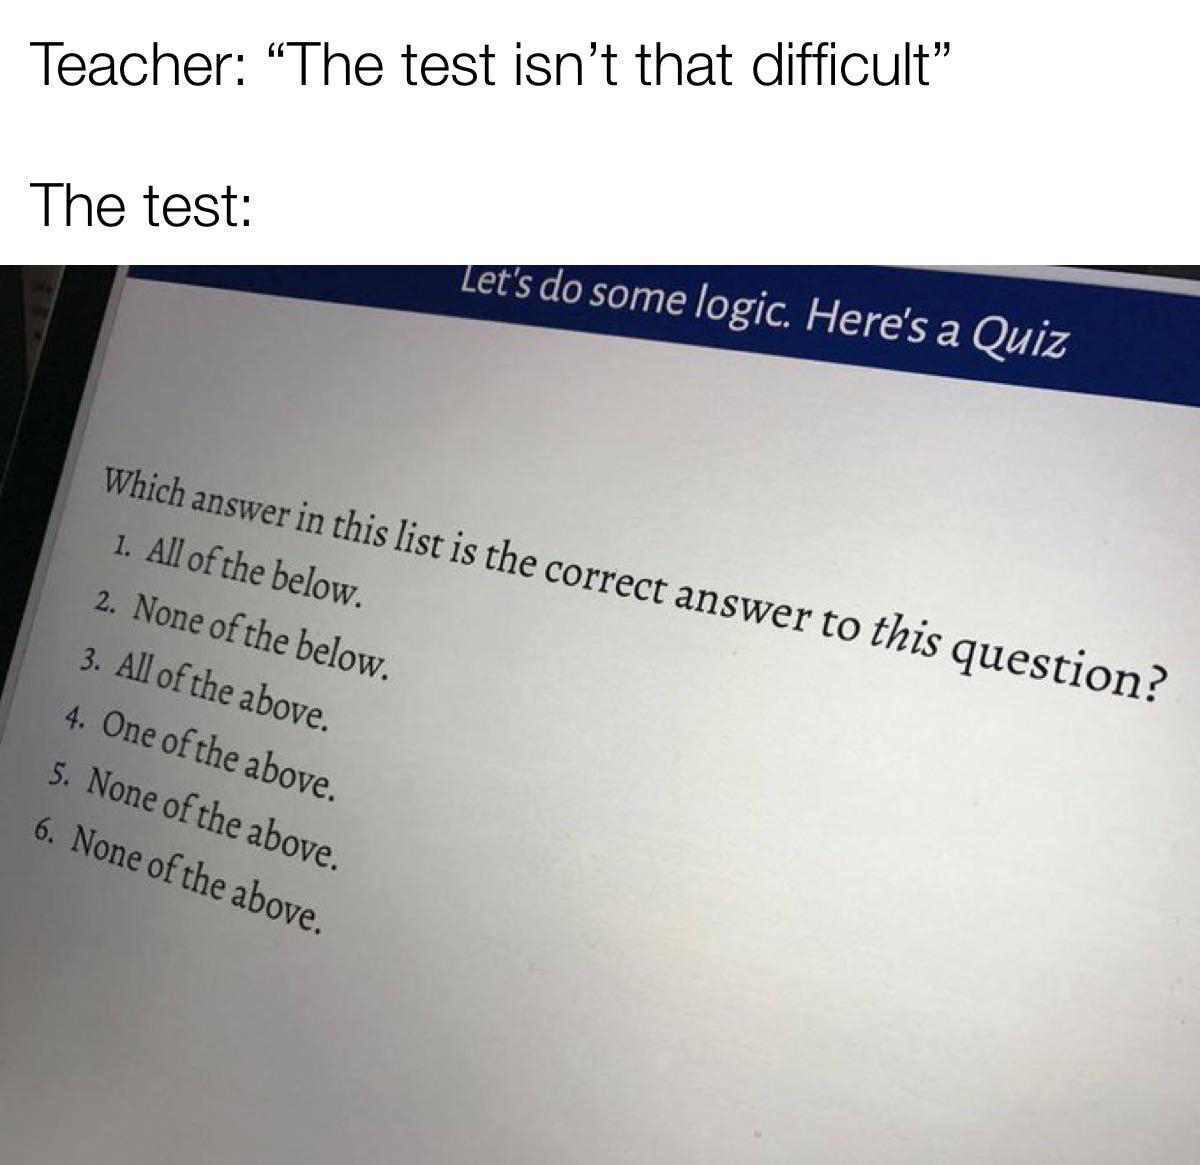 same - Teacher "The test isn't that difficult The test Let's do some logic. Here's a Quiz Which answer in this list is the correct answer to this question? 1. All of the below. 2. None of the below. 3. All of the above. 4. One of the above. 5. None of the